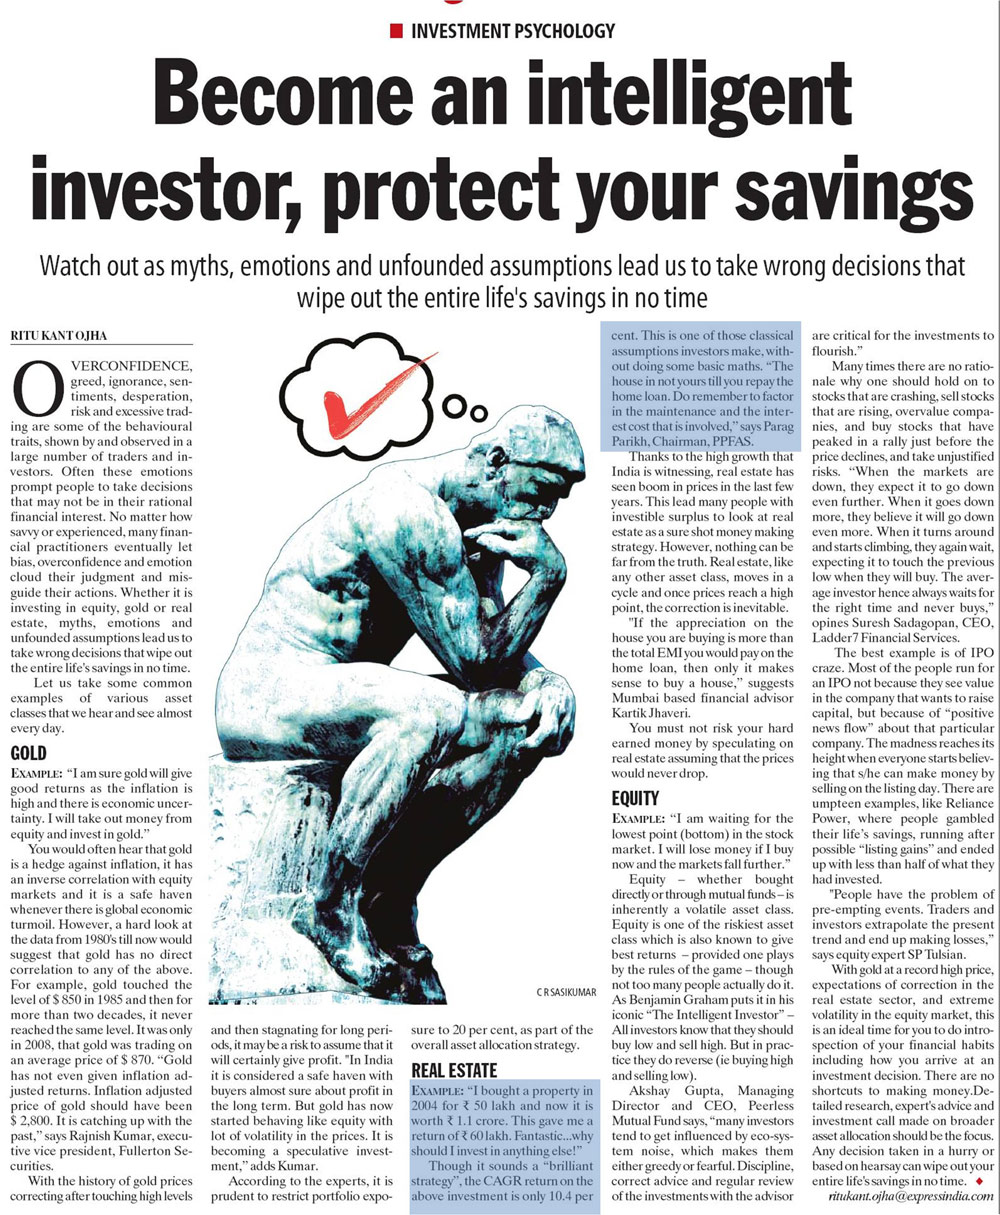 Become an intelligent investor, protect your savings